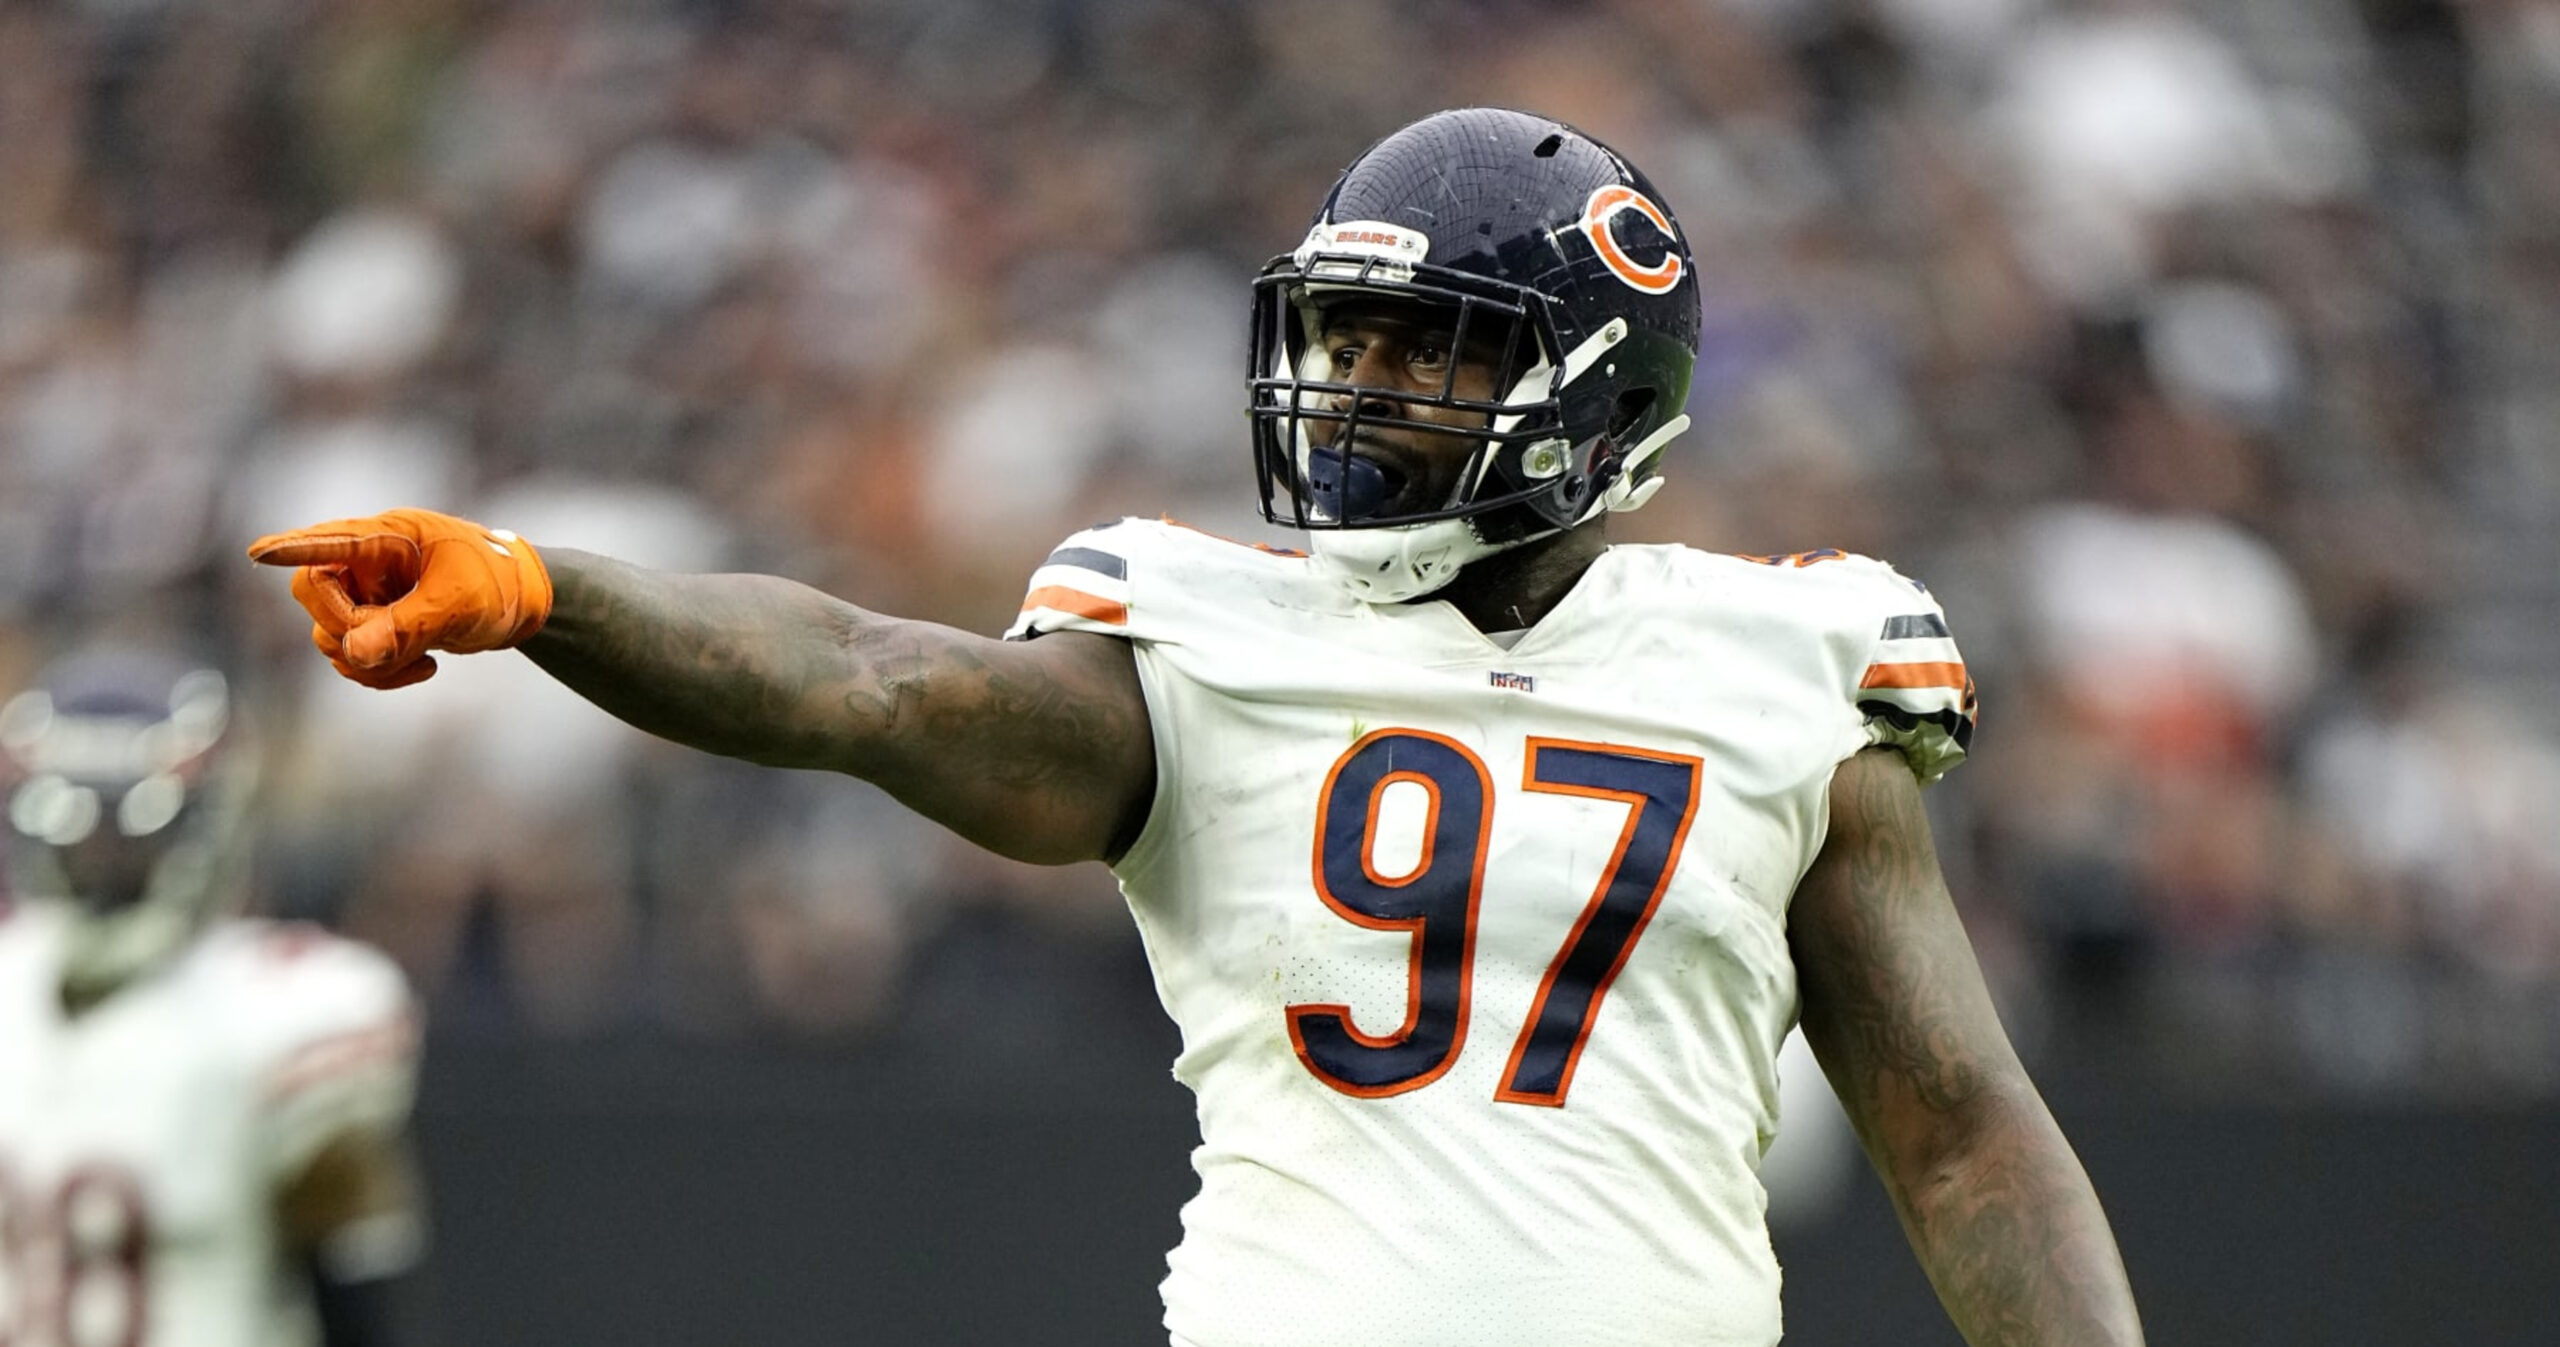 Report: DE Mario Edwards to Sign Jaguars Contract Following Bears Release